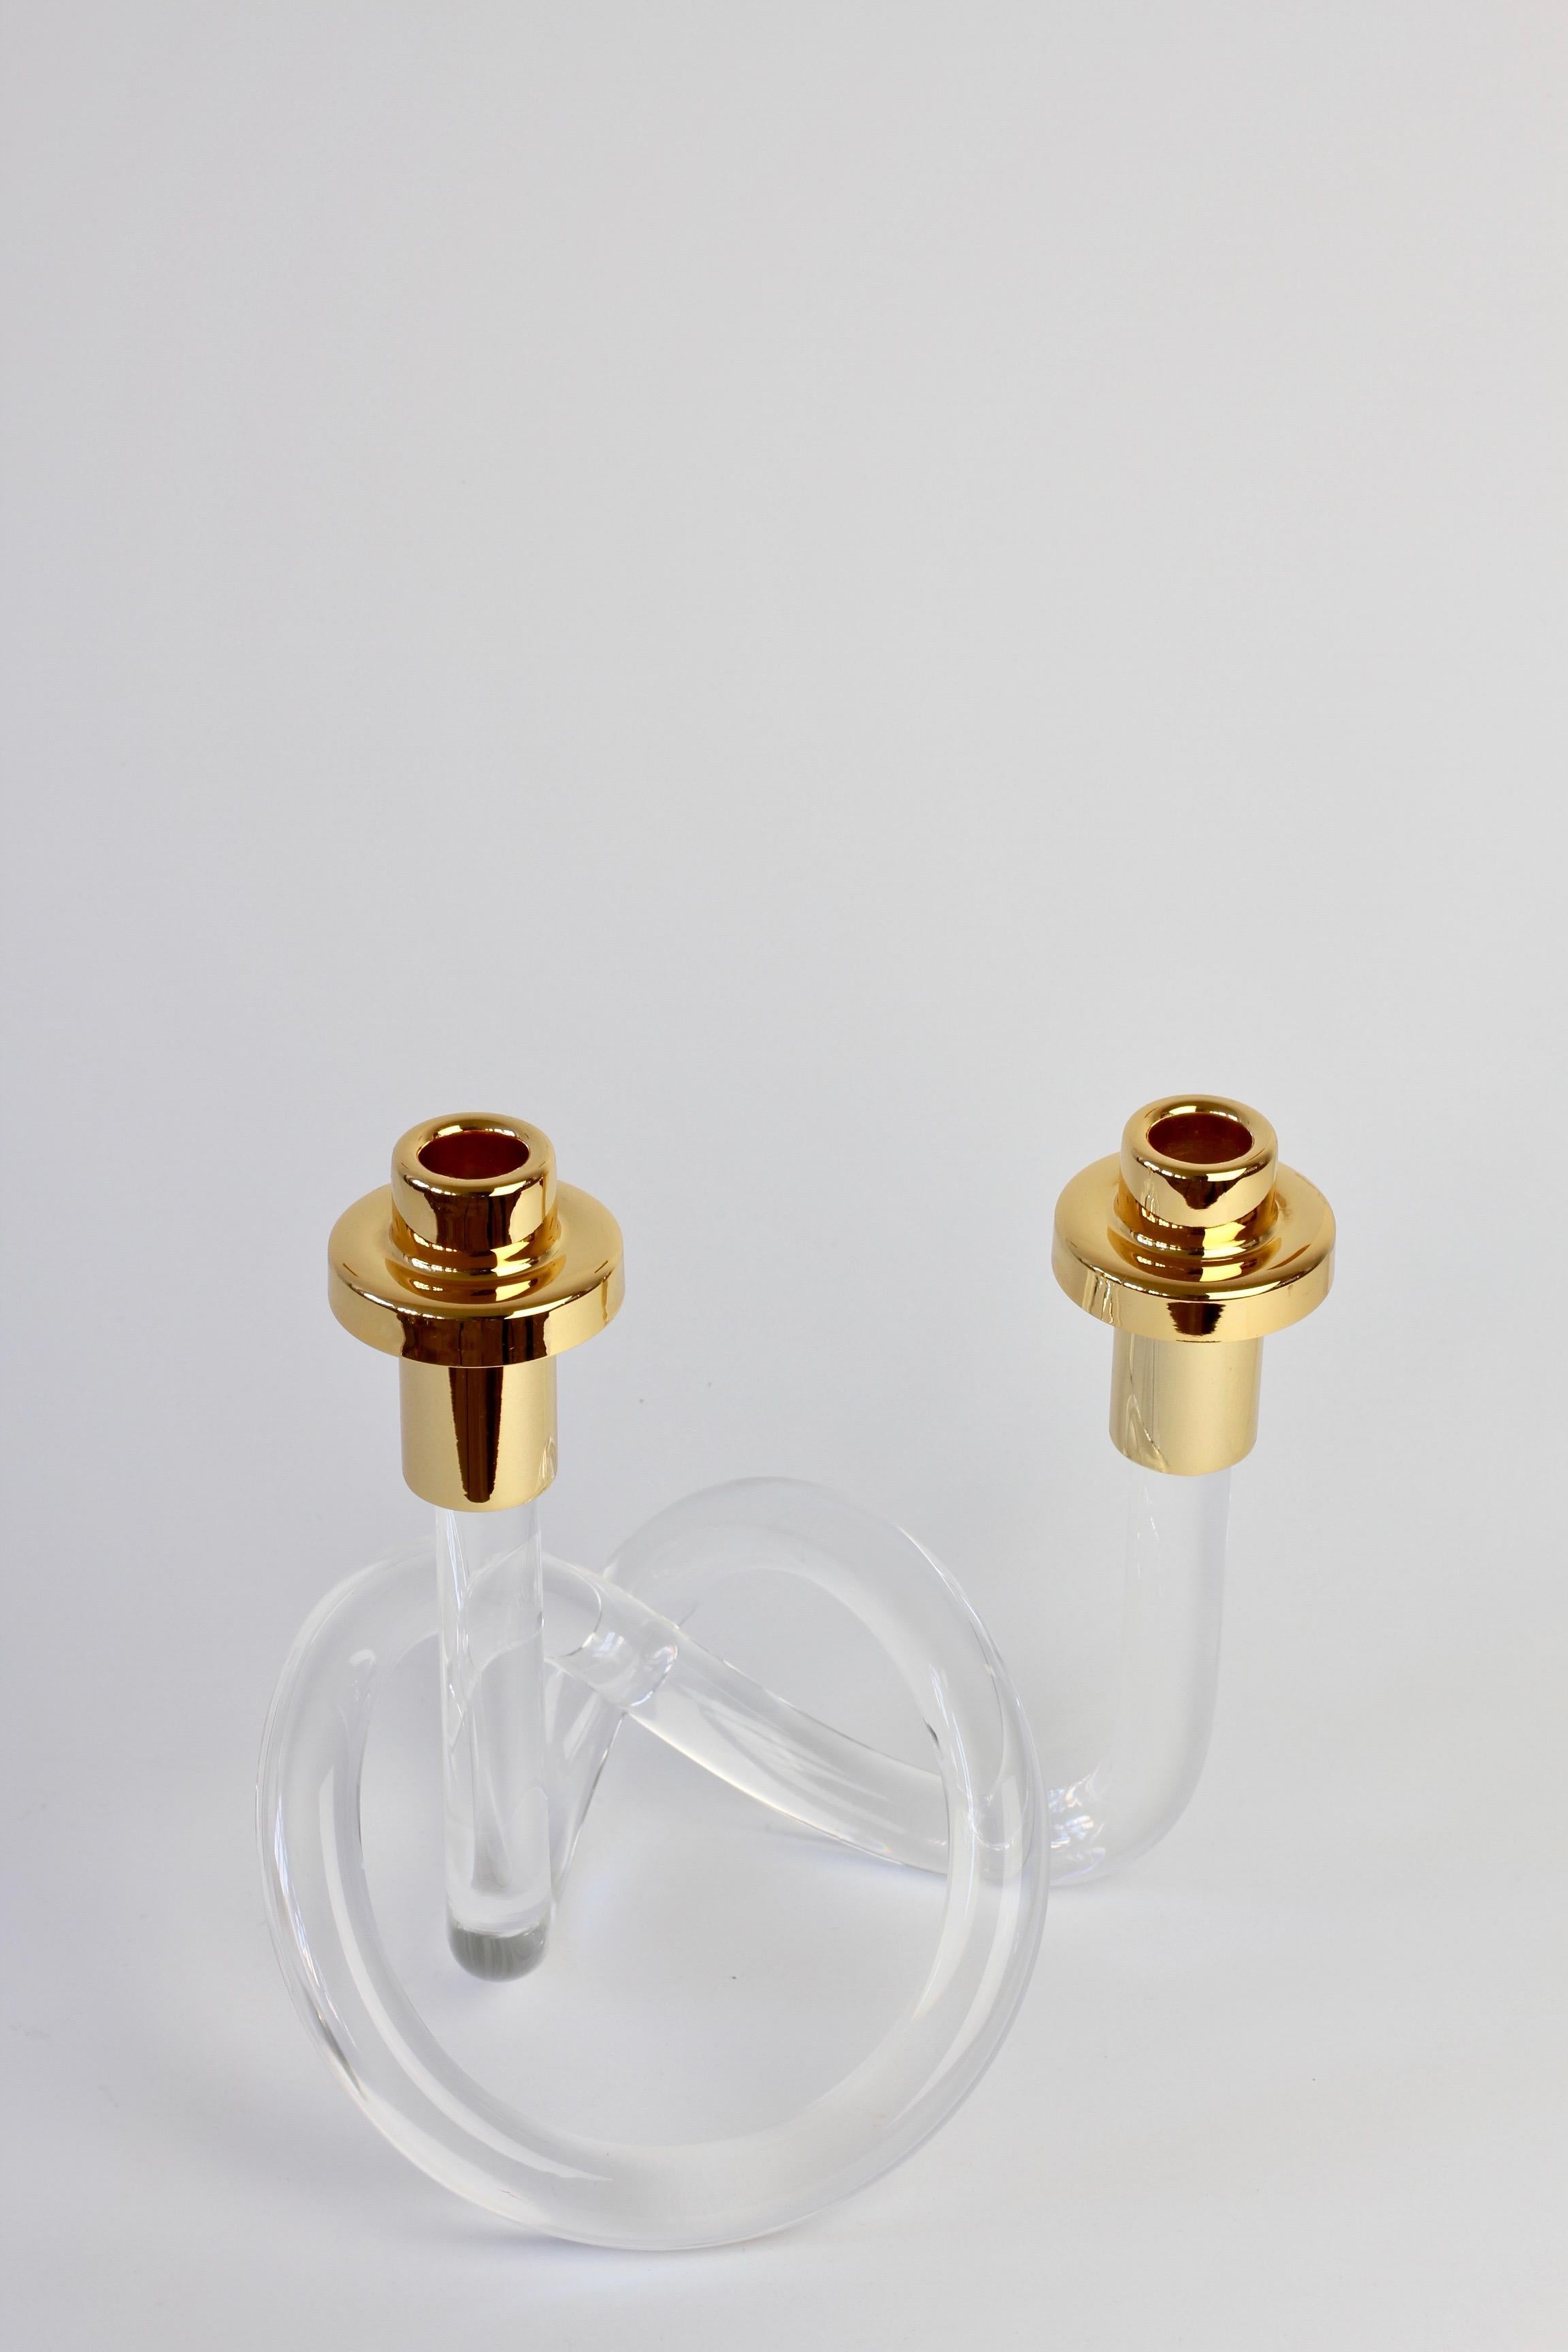 20th Century Gold and Lucite Twisted Pretzel Candlestick Holder/Candelabra by Dorothy Thorpe